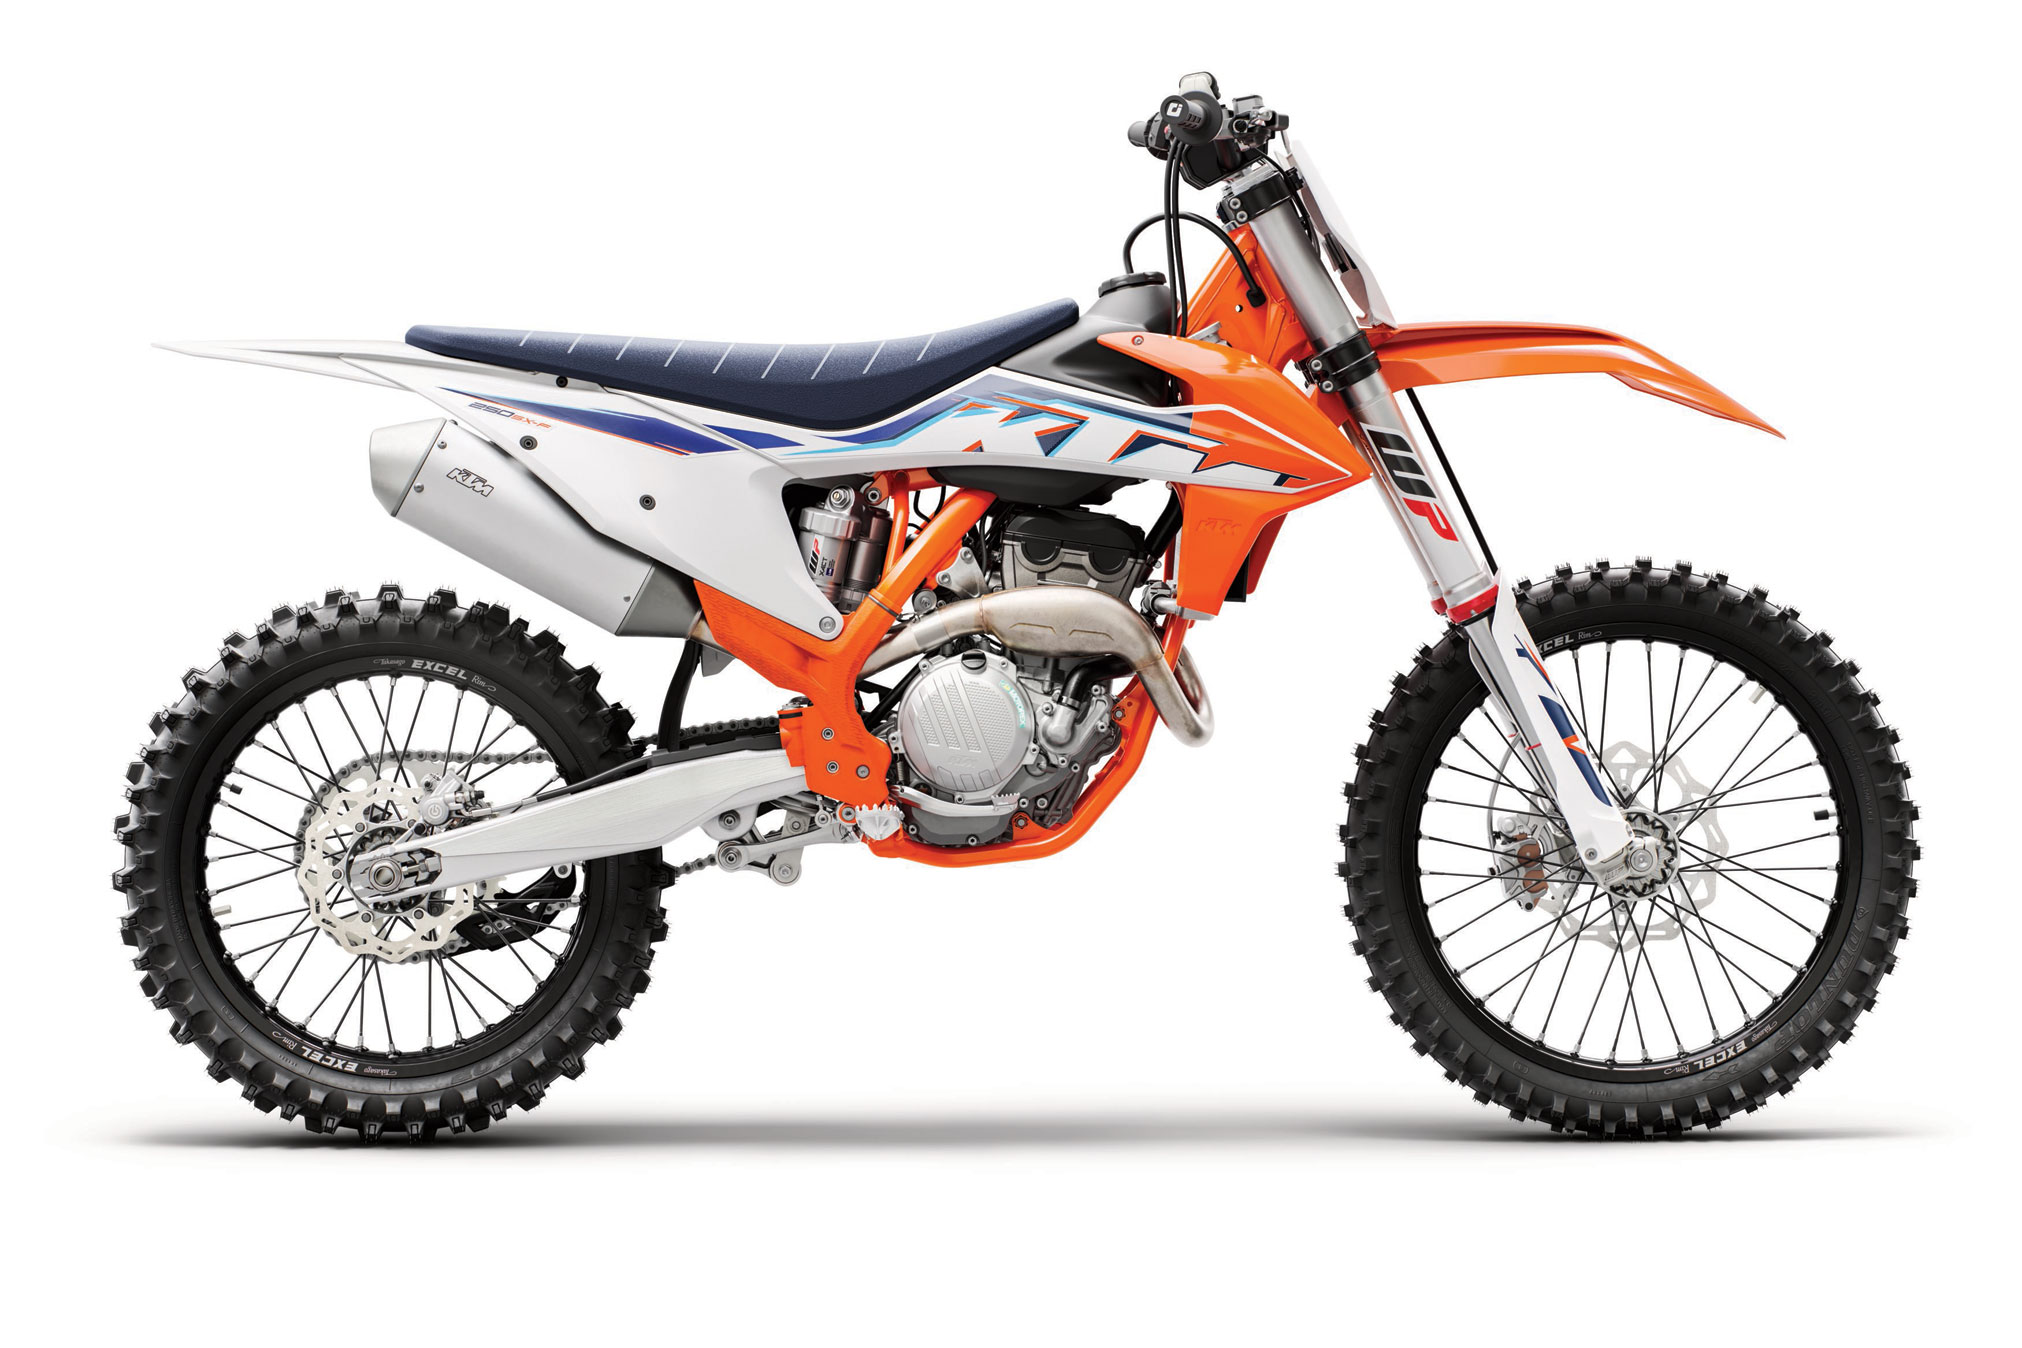 2022 KTM 250 SXF Guide • Total Motorcycle